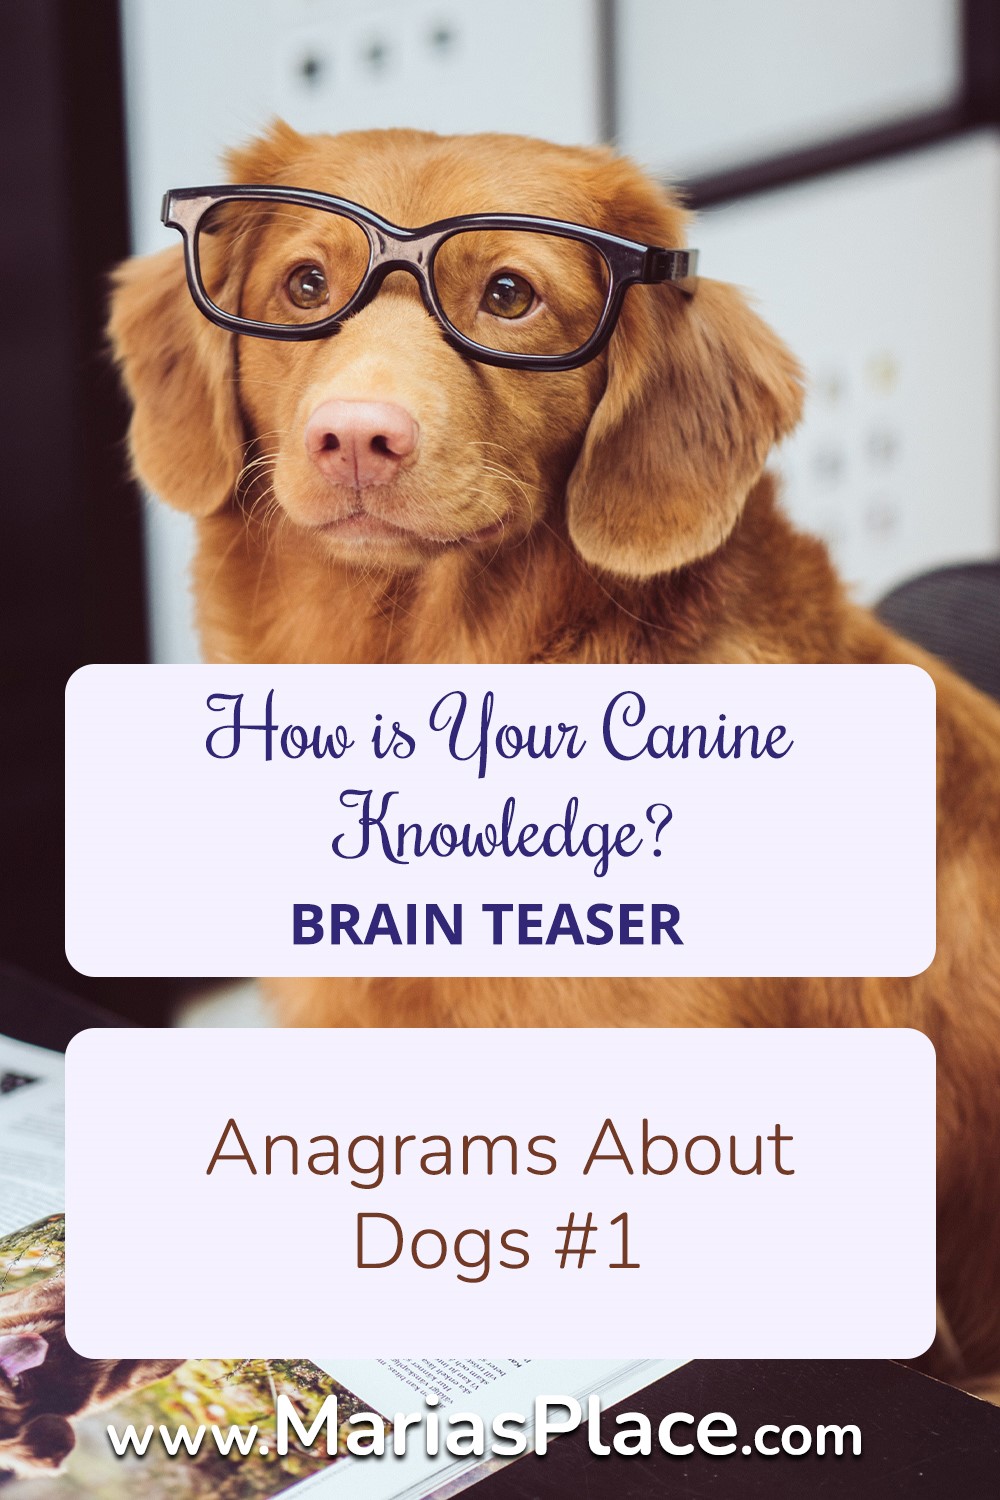 Anagram:  Dogs #1